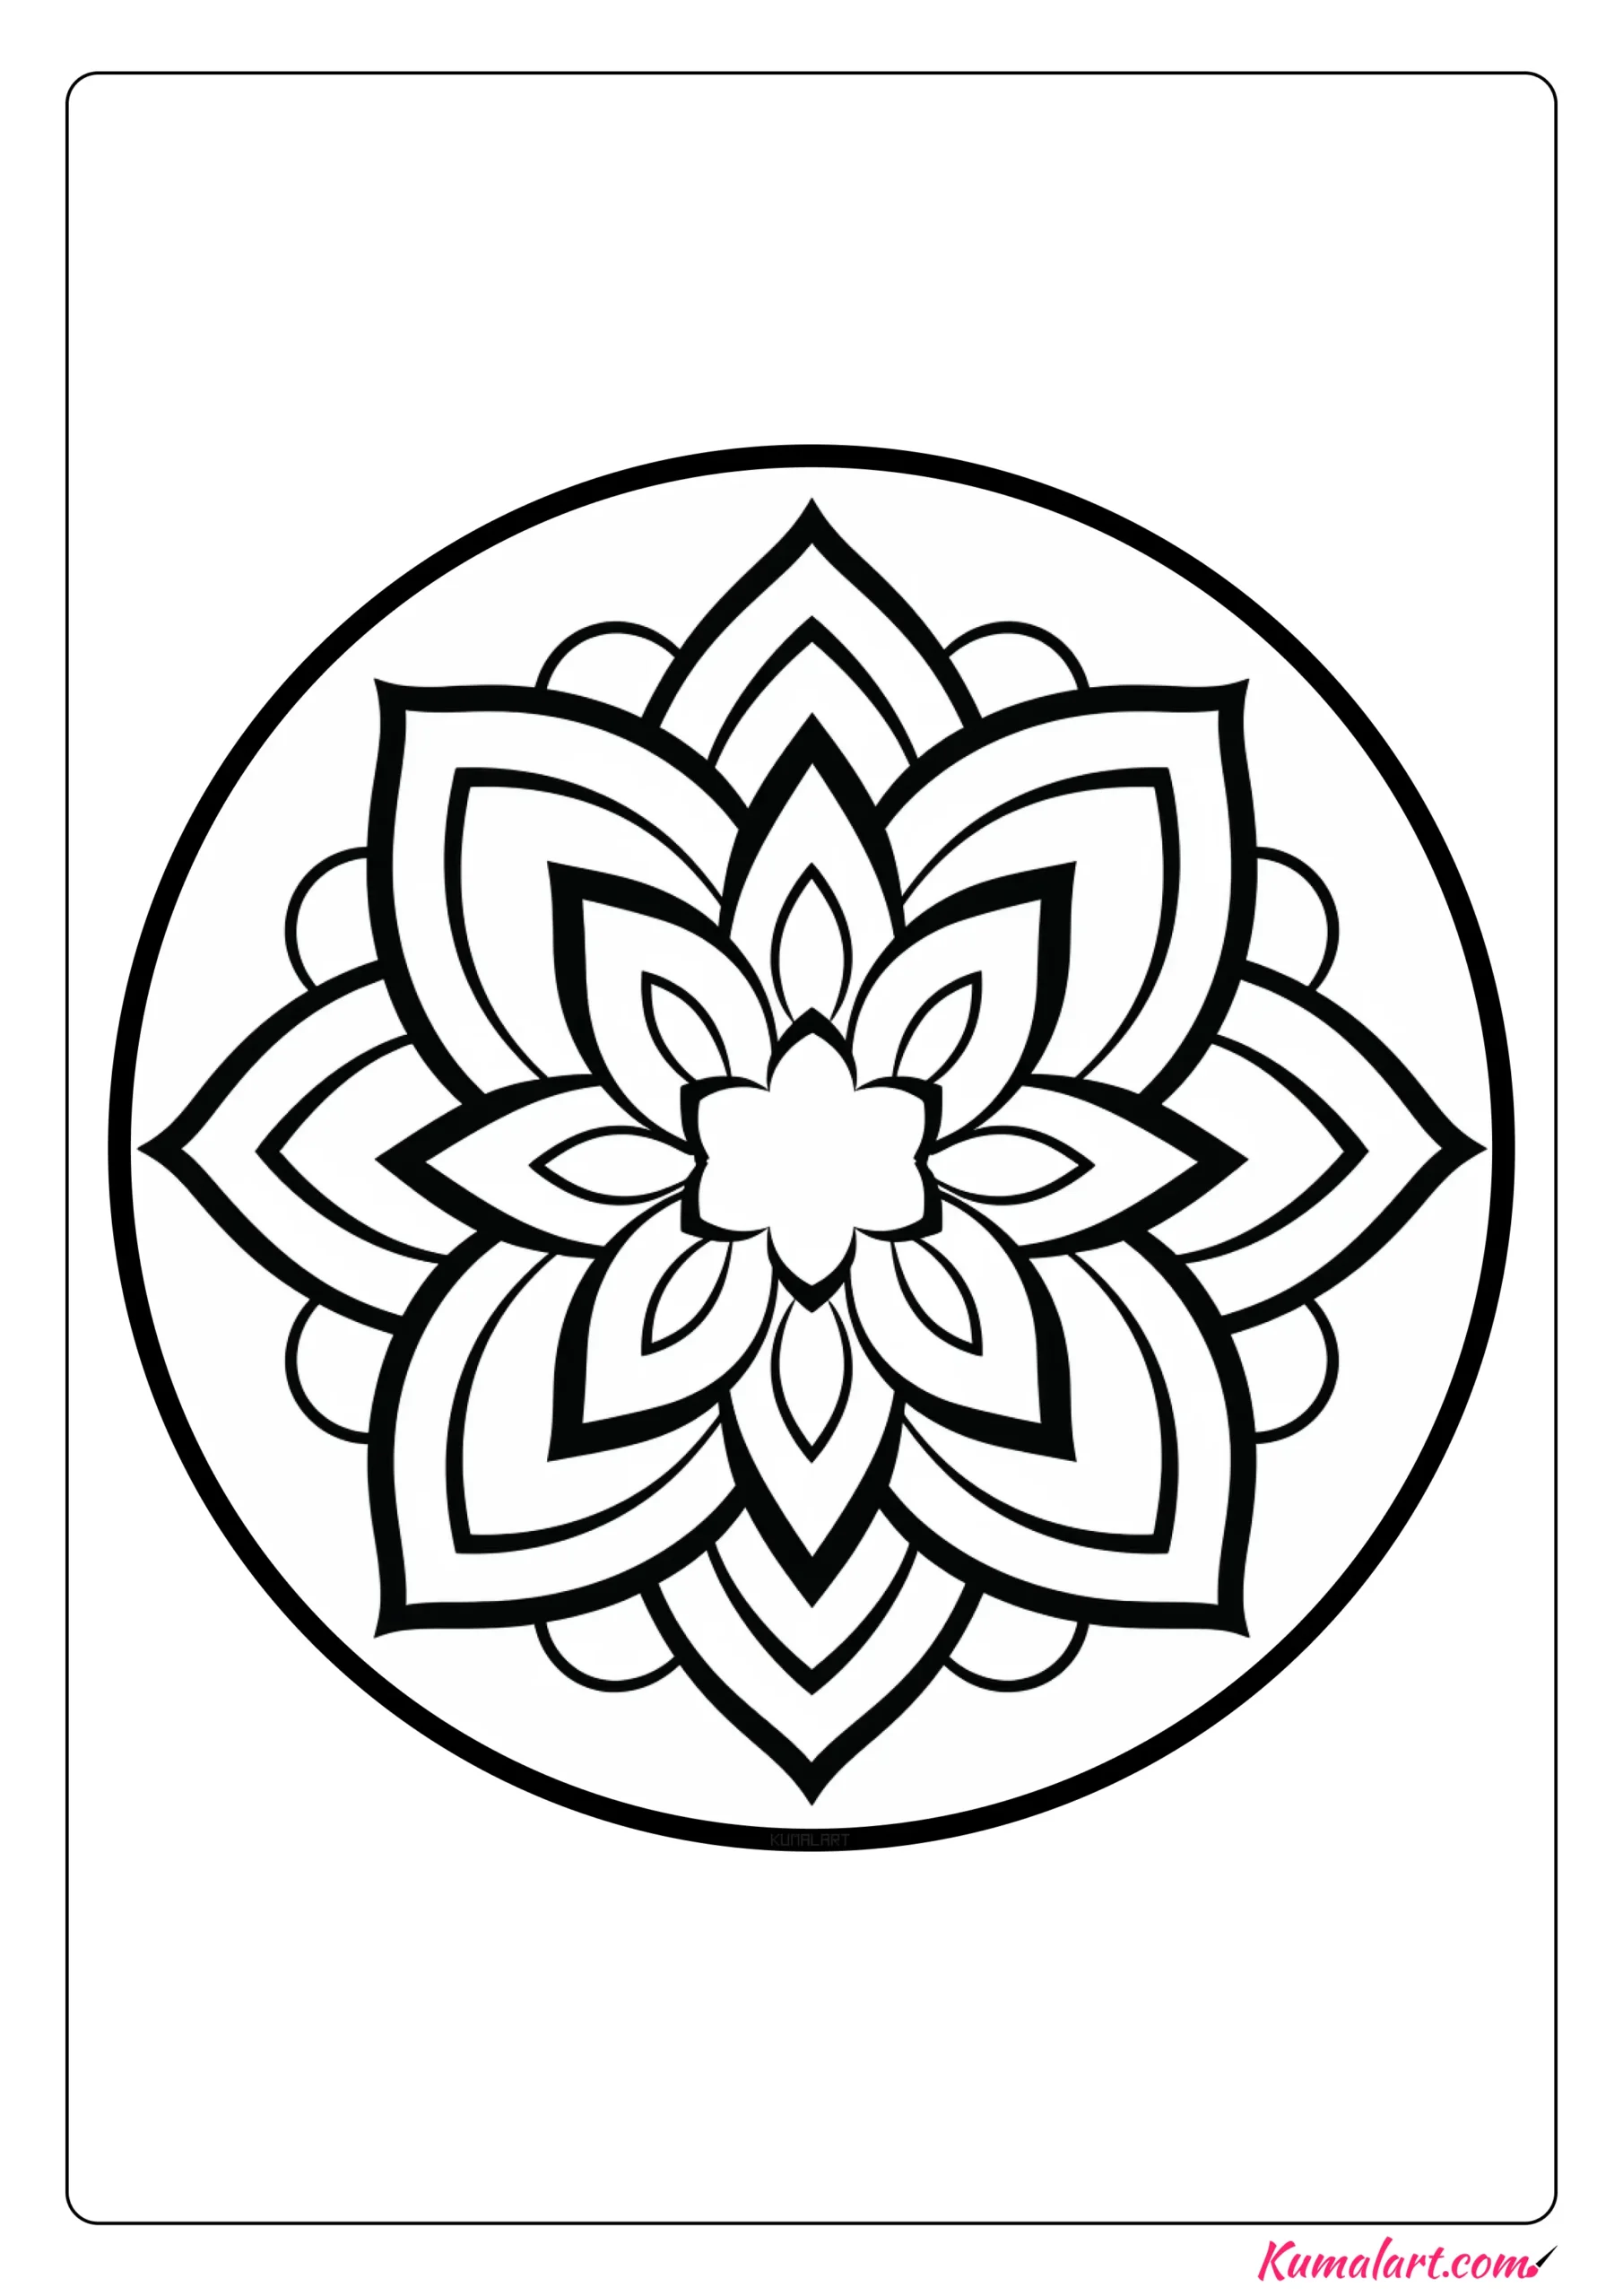 Star Lotus Flower Coloring Page